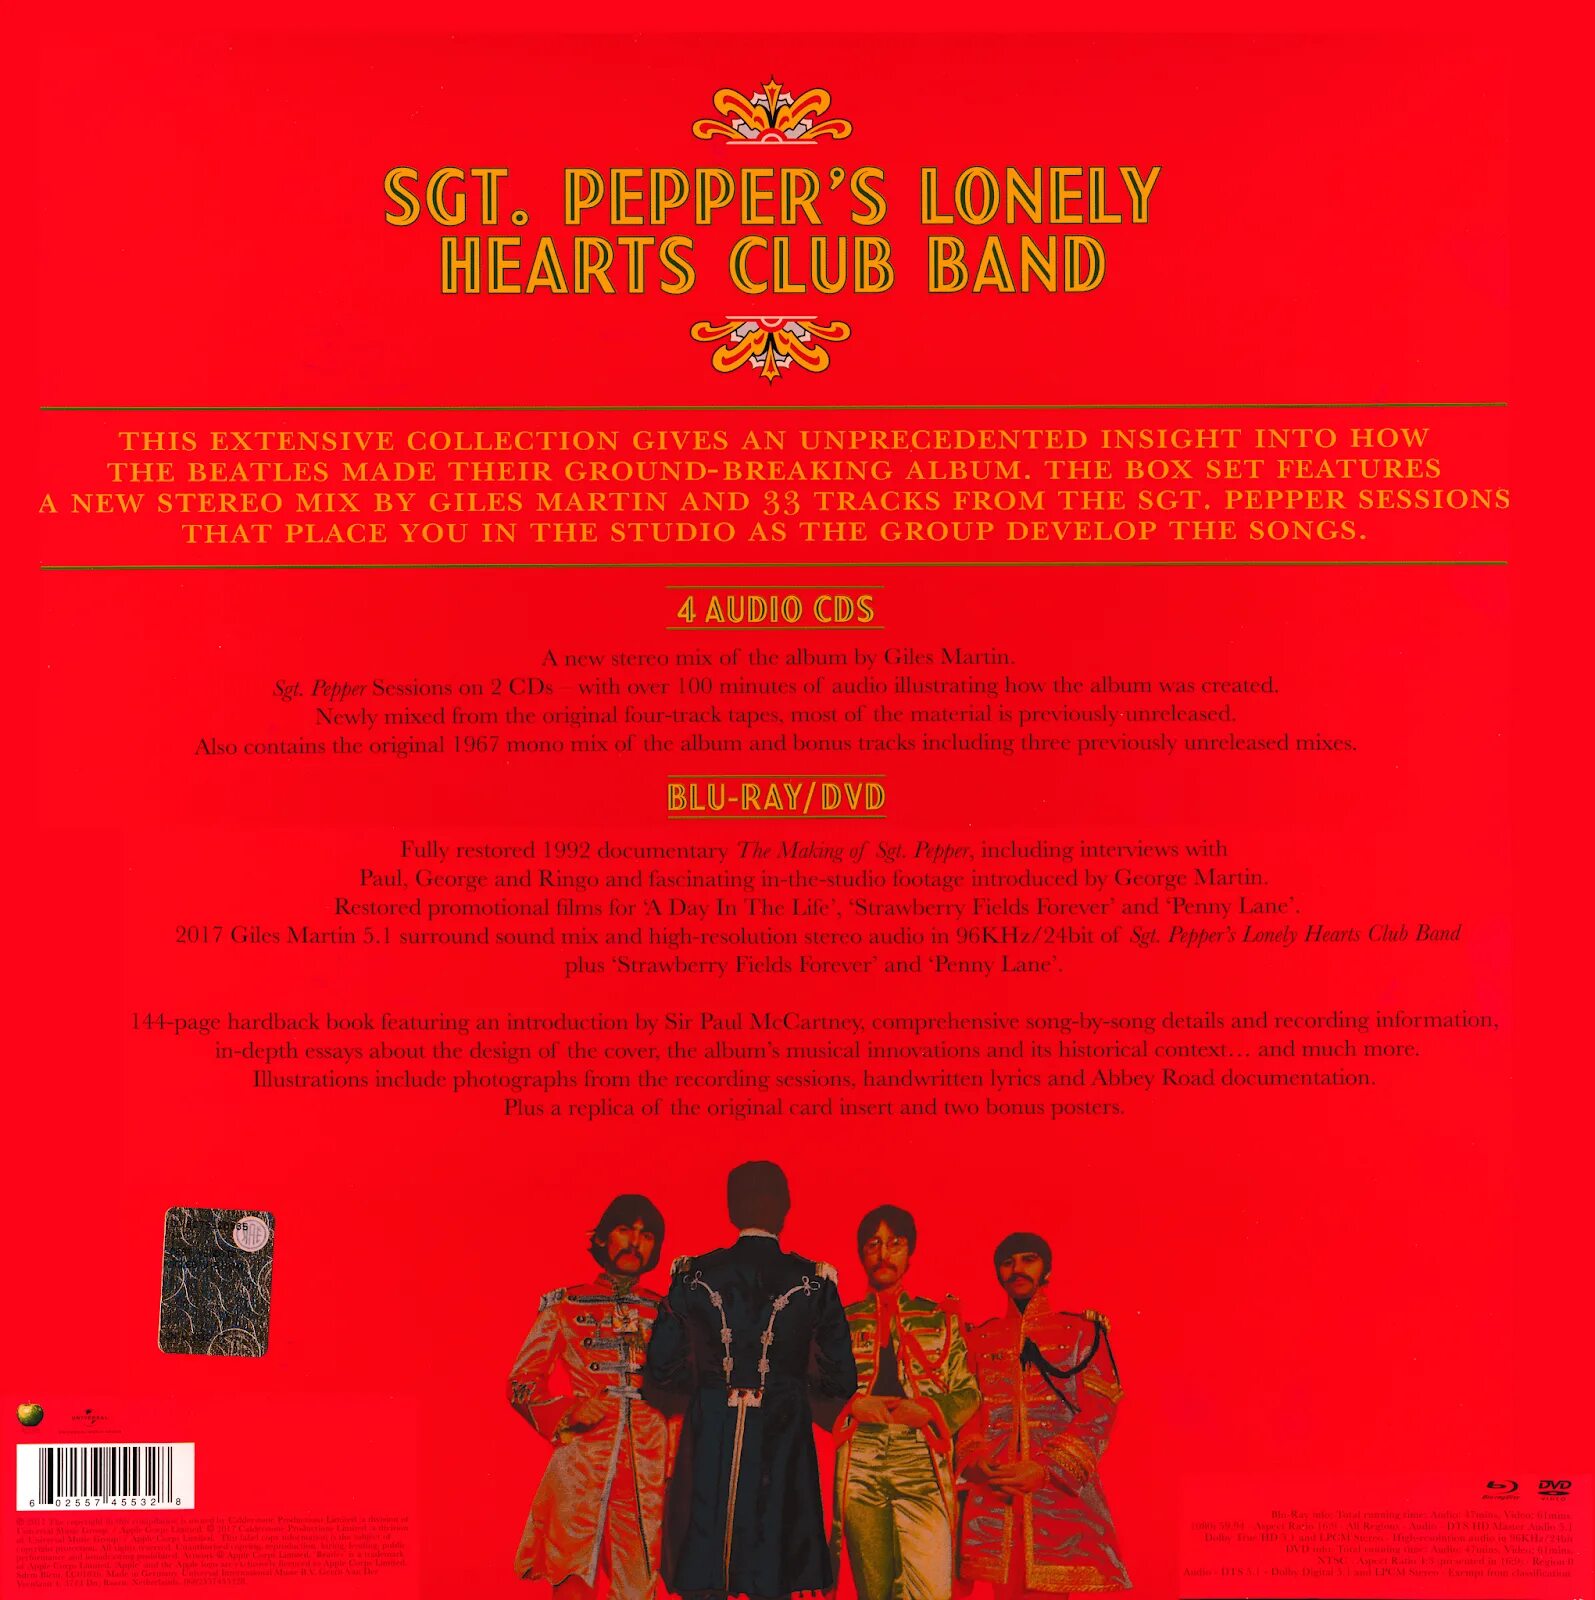 Mp3 pepper. Sgt. Pepper’s Lonely Hearts Club Band the Beatles. Sgt Pepper's Lonely Hearts Club Band. The Beatles Sgt. Pepper's Lonely Hearts Club Band 2017. The Beatles Sgt Pepper оркестр 1967.